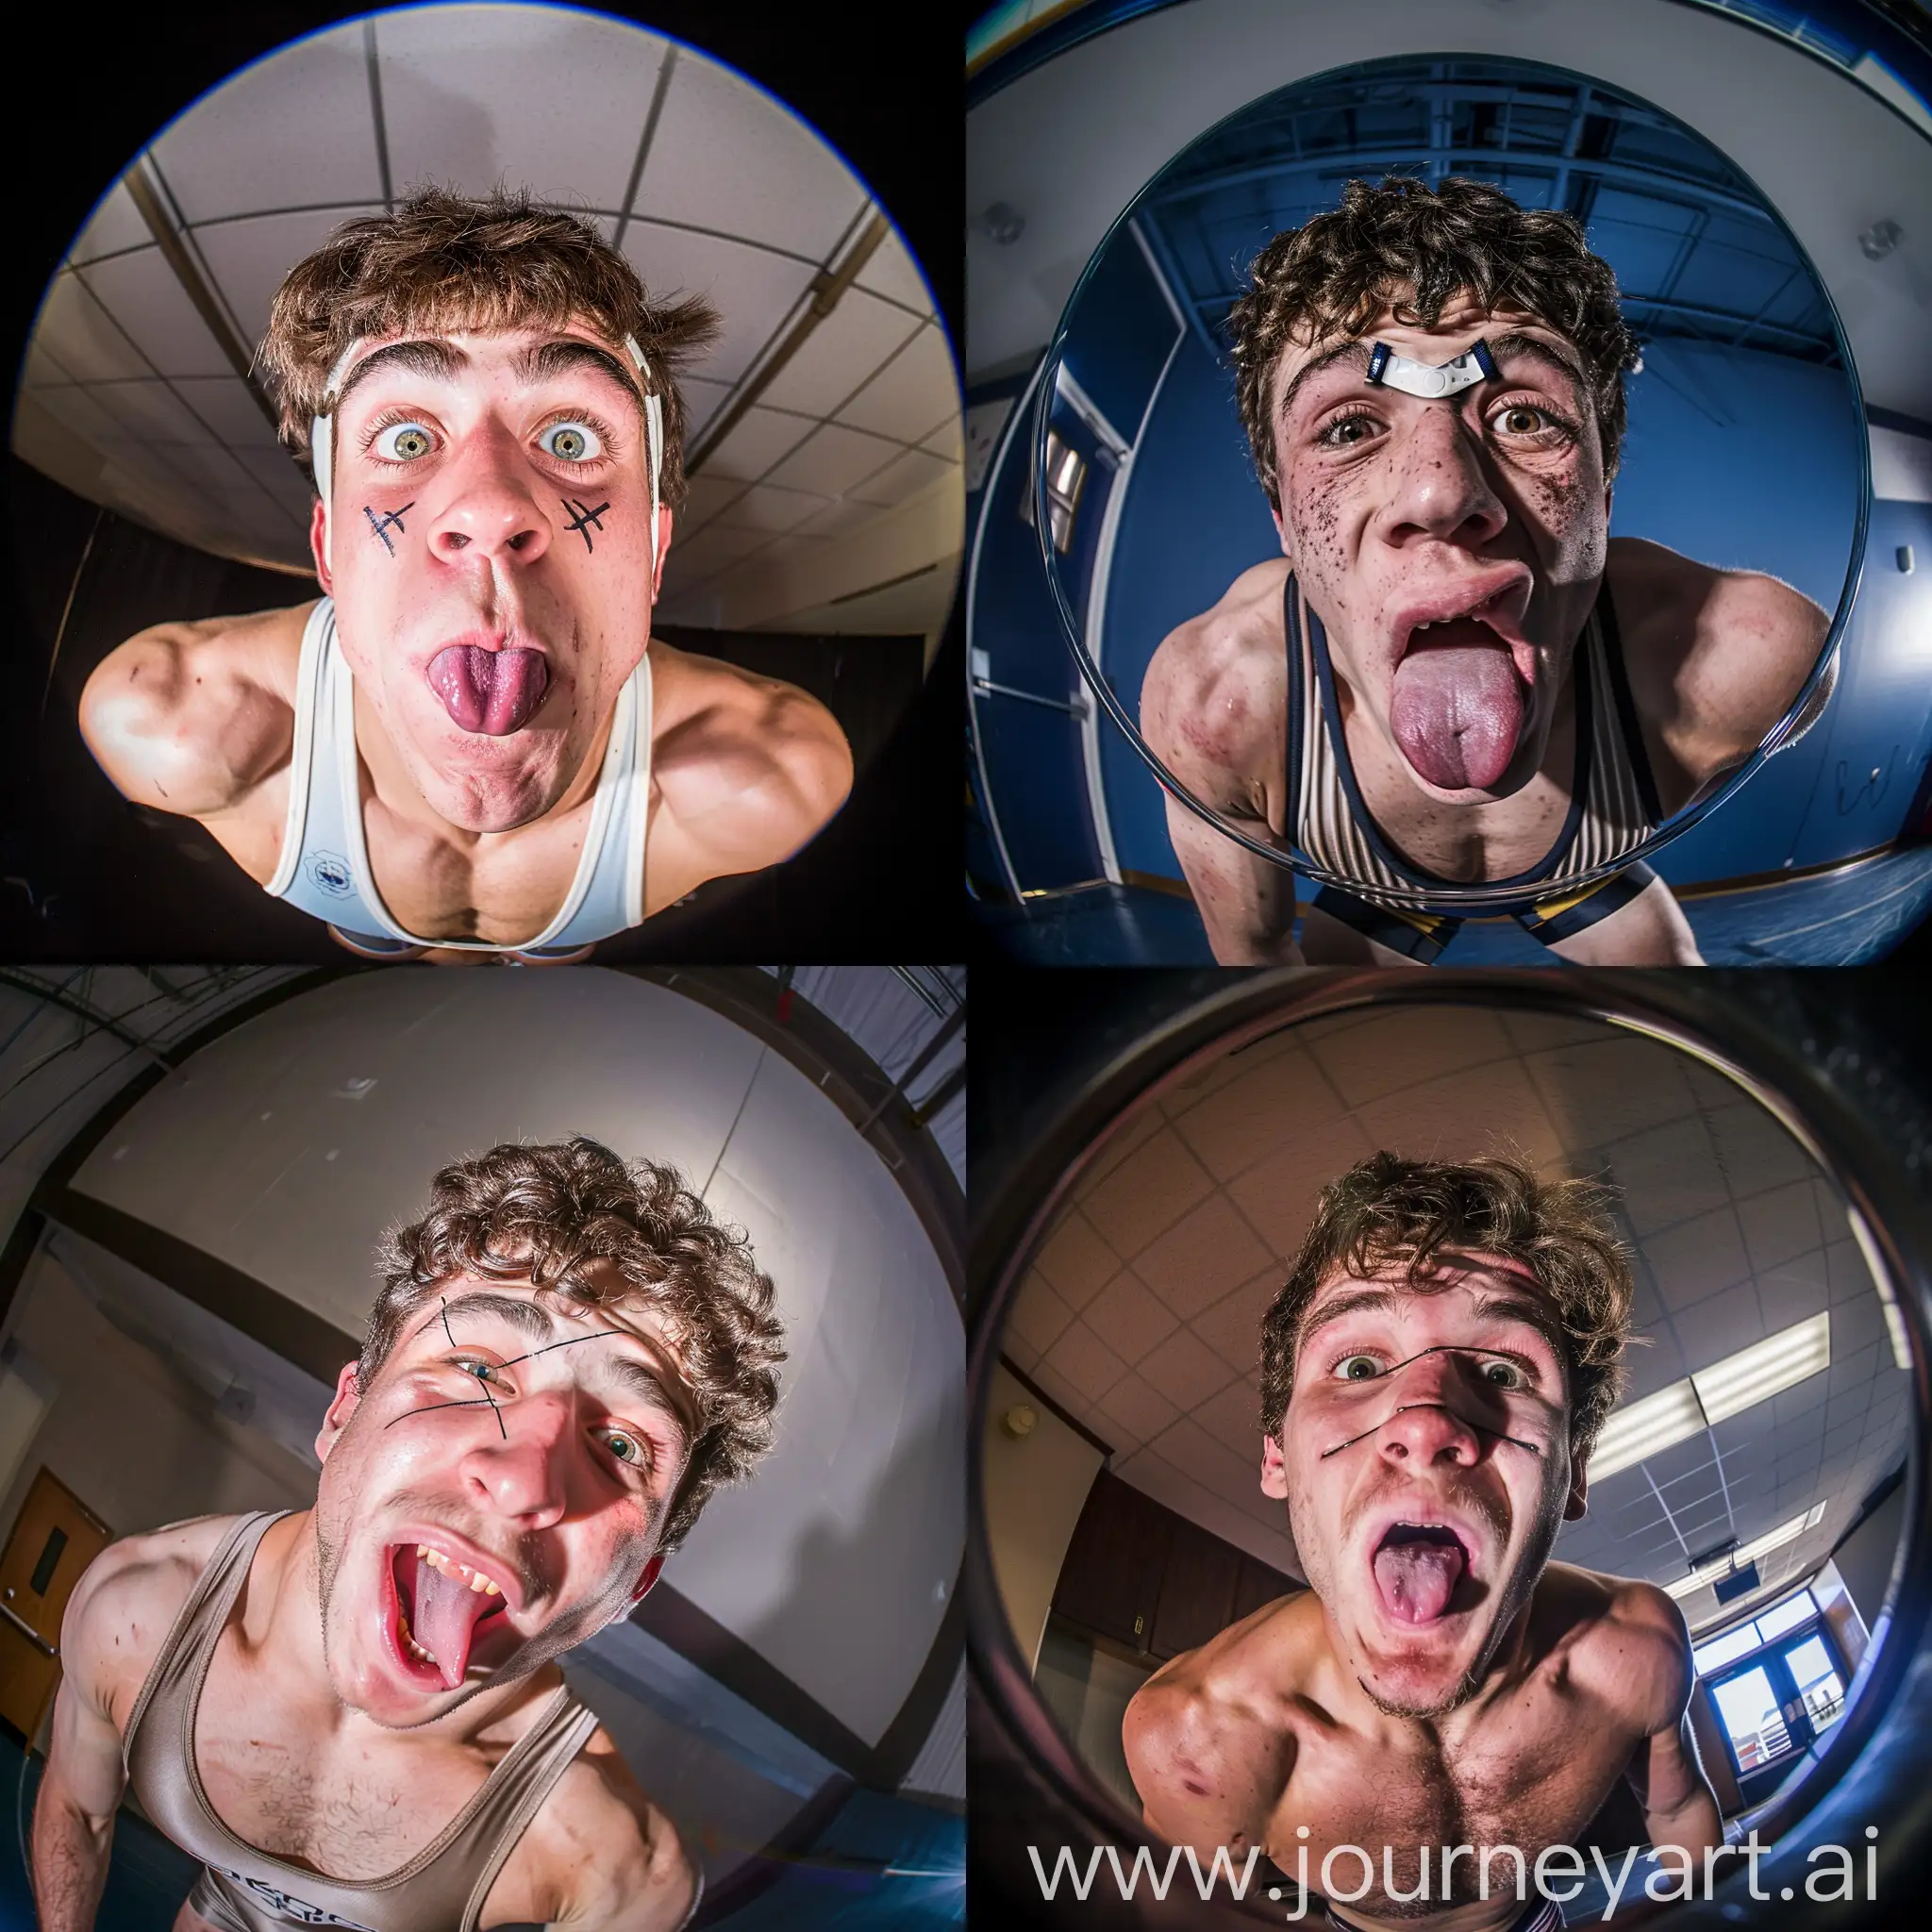 Silly-Selfie-College-Wrestler-Making-Faces